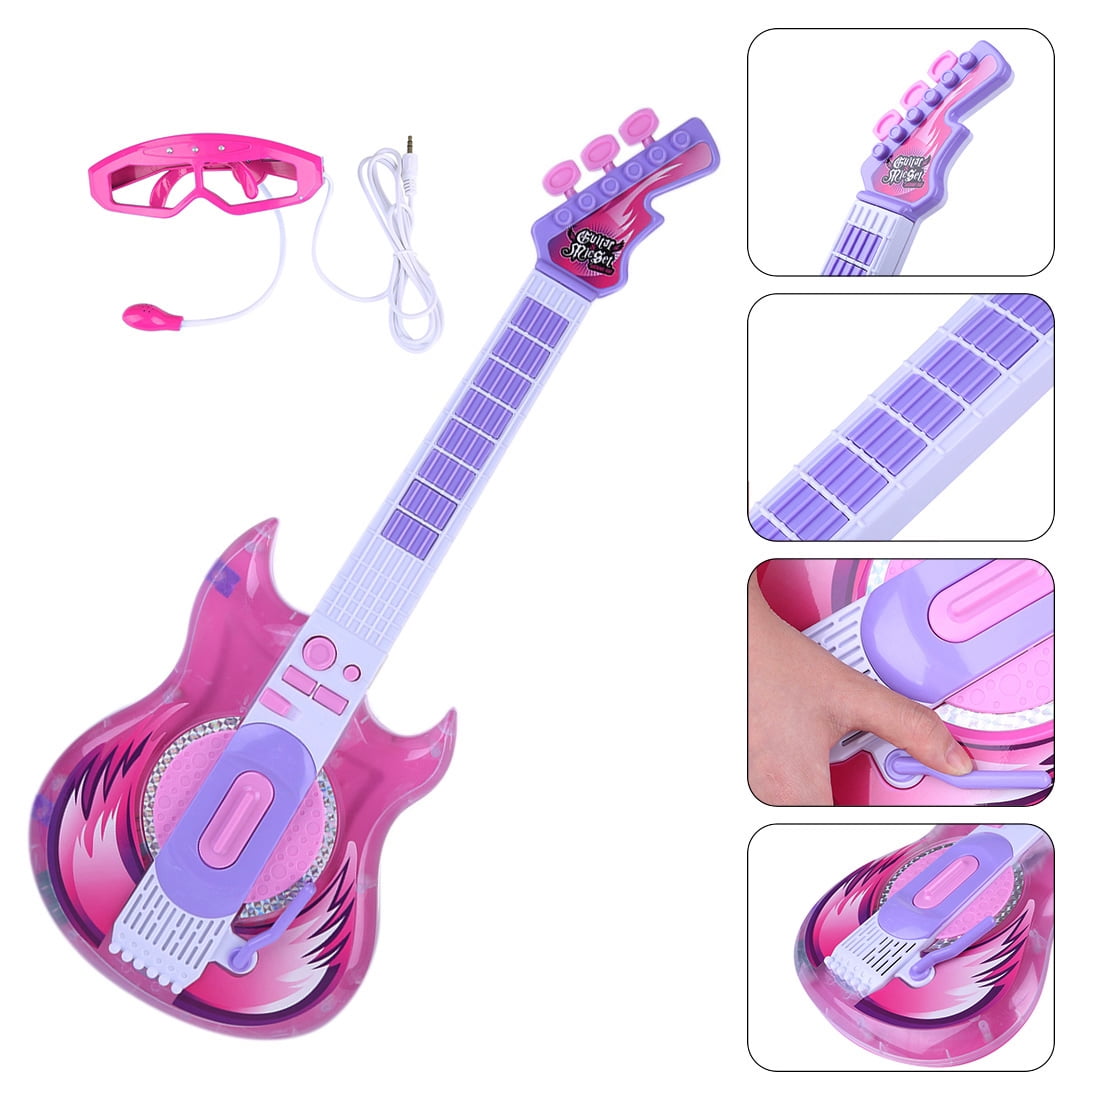 Childrens Toy Guitar Electronic Guitar Toy with Glasses Microphone Set Kids Gift 